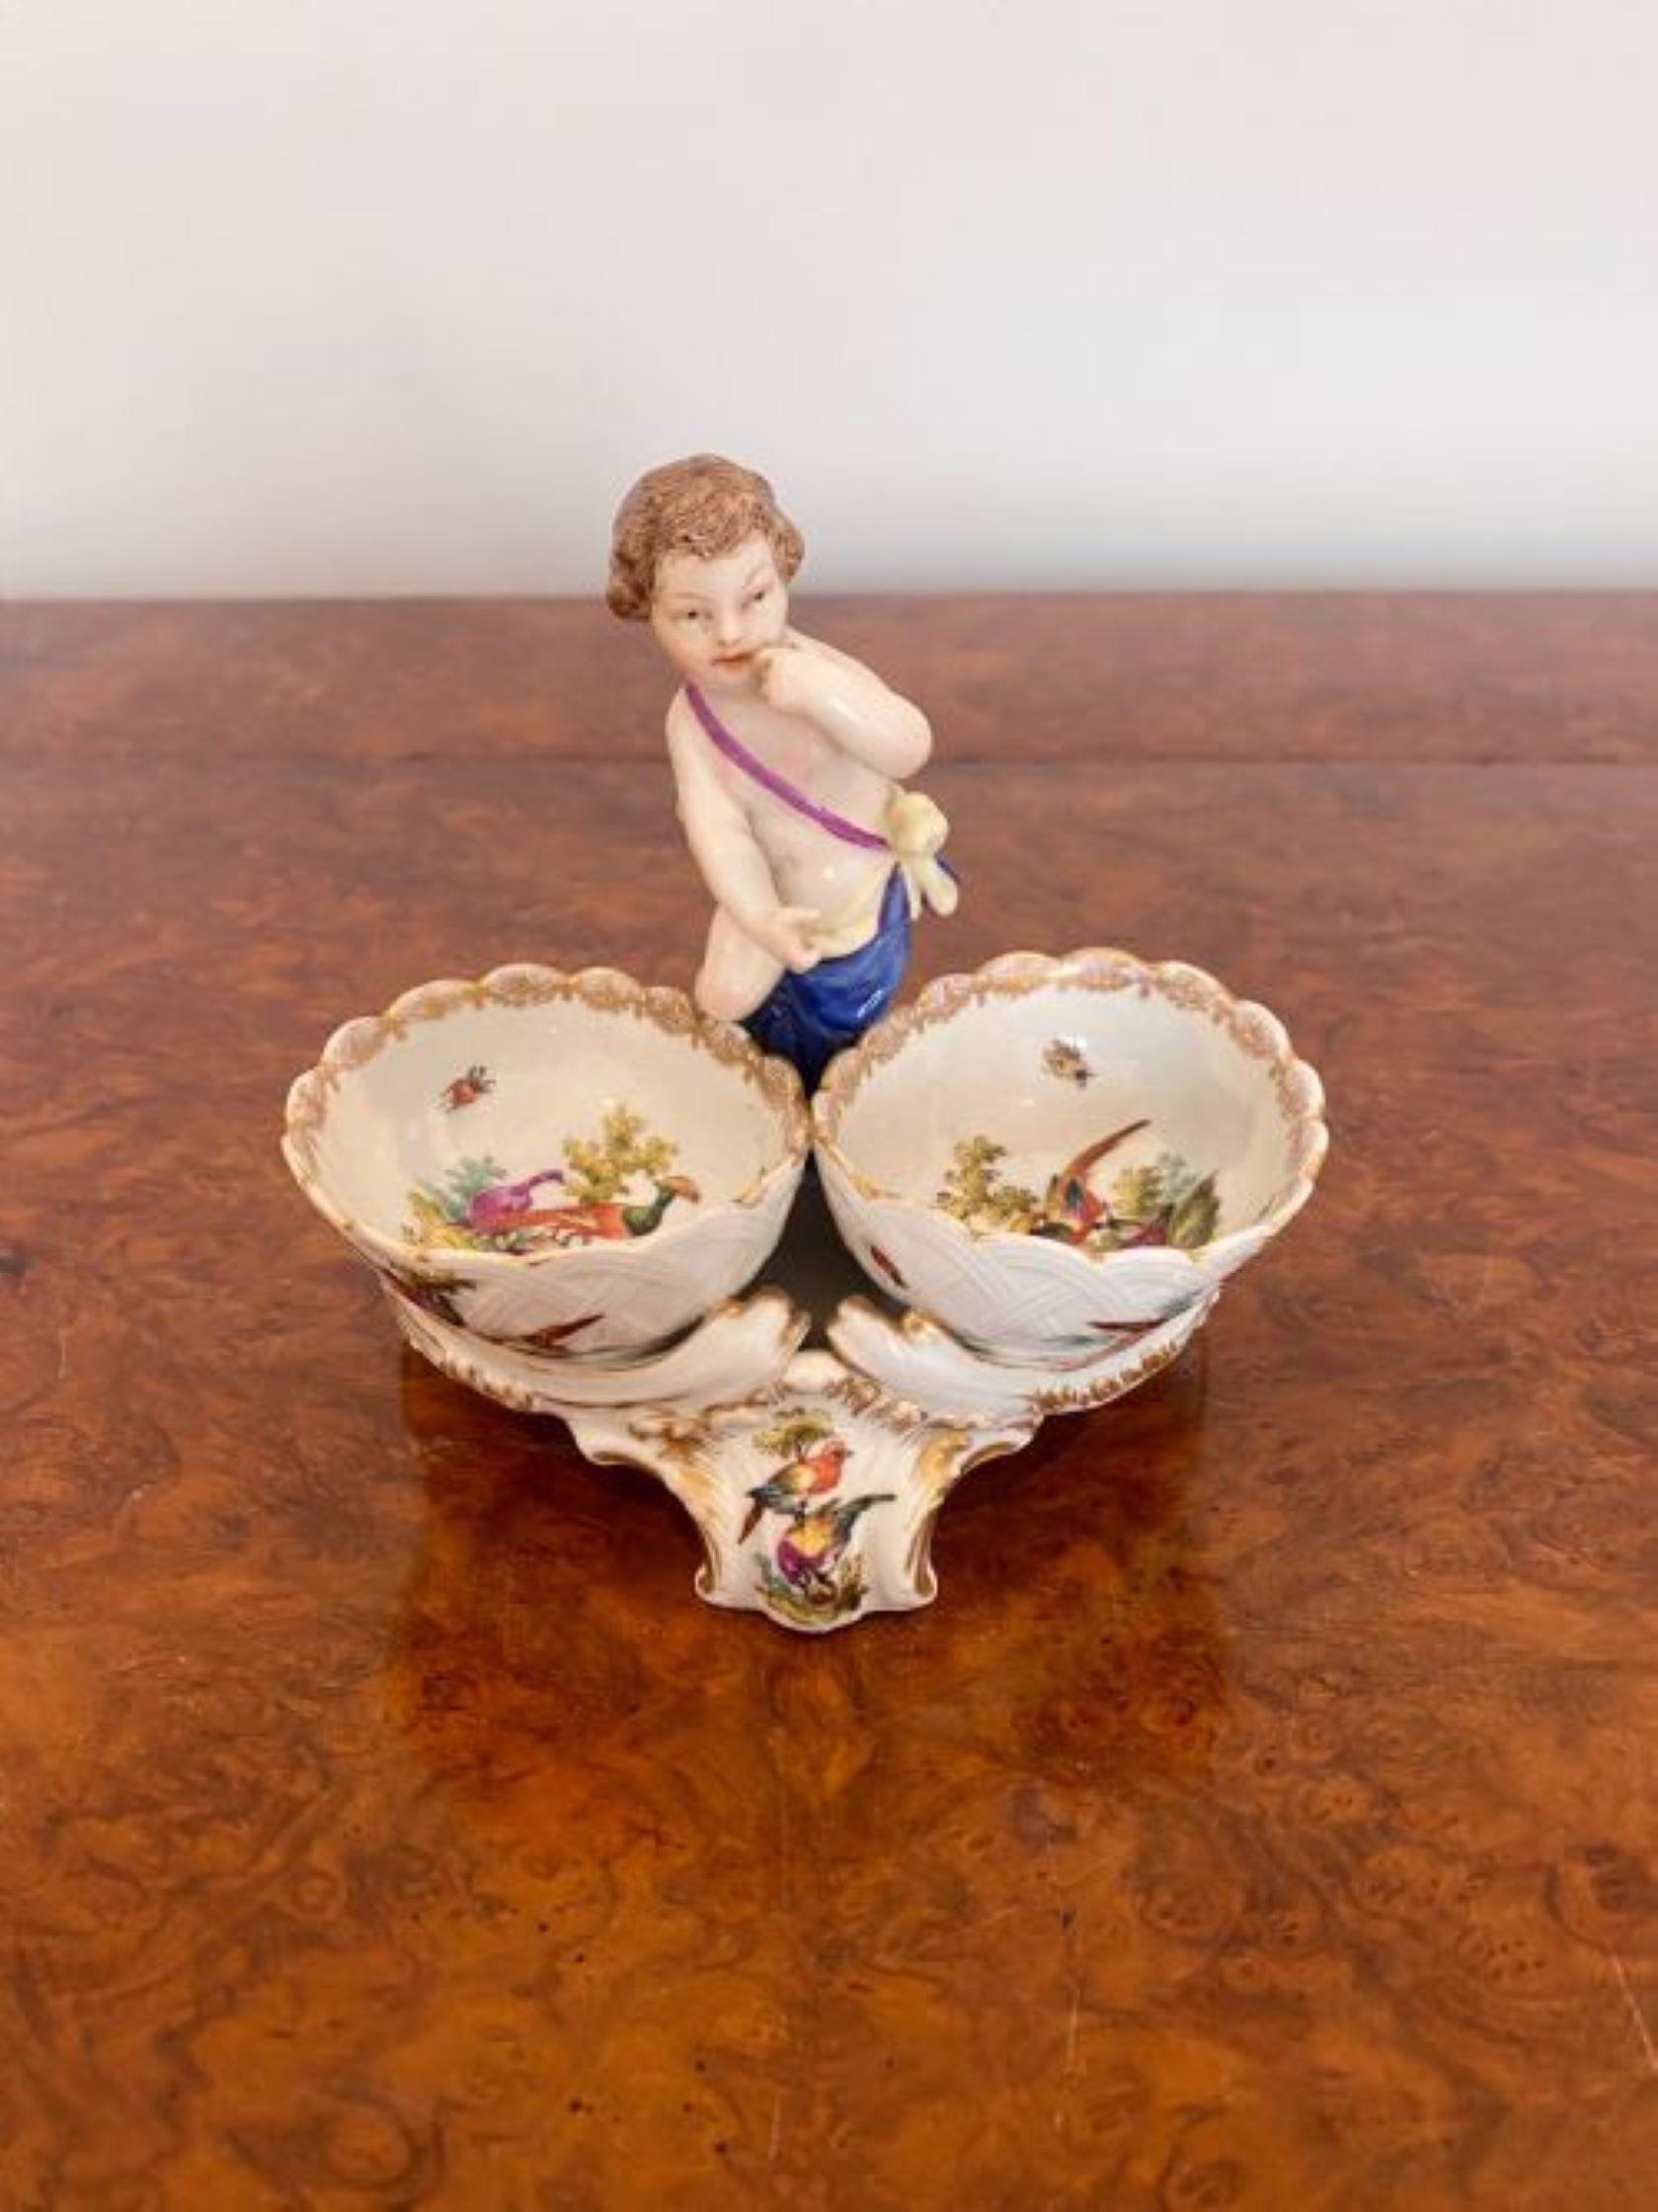 Quality Antique Victorian continental porcelain group having a cherub with two shaped bowls for salt and pepper on a shaped base with quality hand painted birds and scroll decoration in blue, red, green, yellow, white and gold colours.